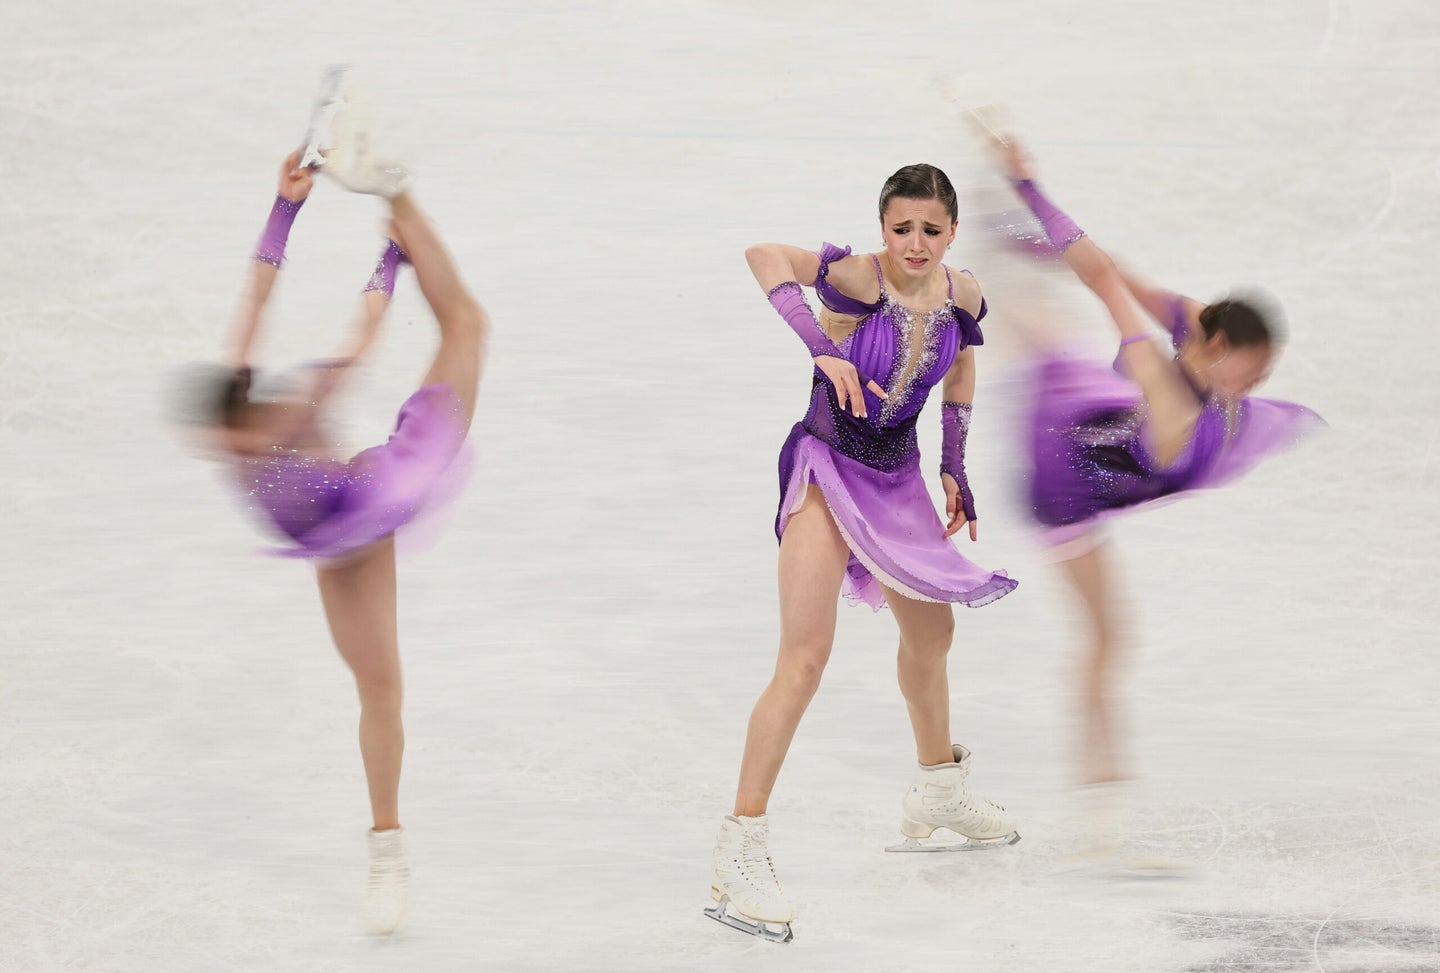 Russian figure skater Kamila Valieva wearing a purple costume, shown in three different poses on the ice during a program at the 2022 Beijing Winter Olympics